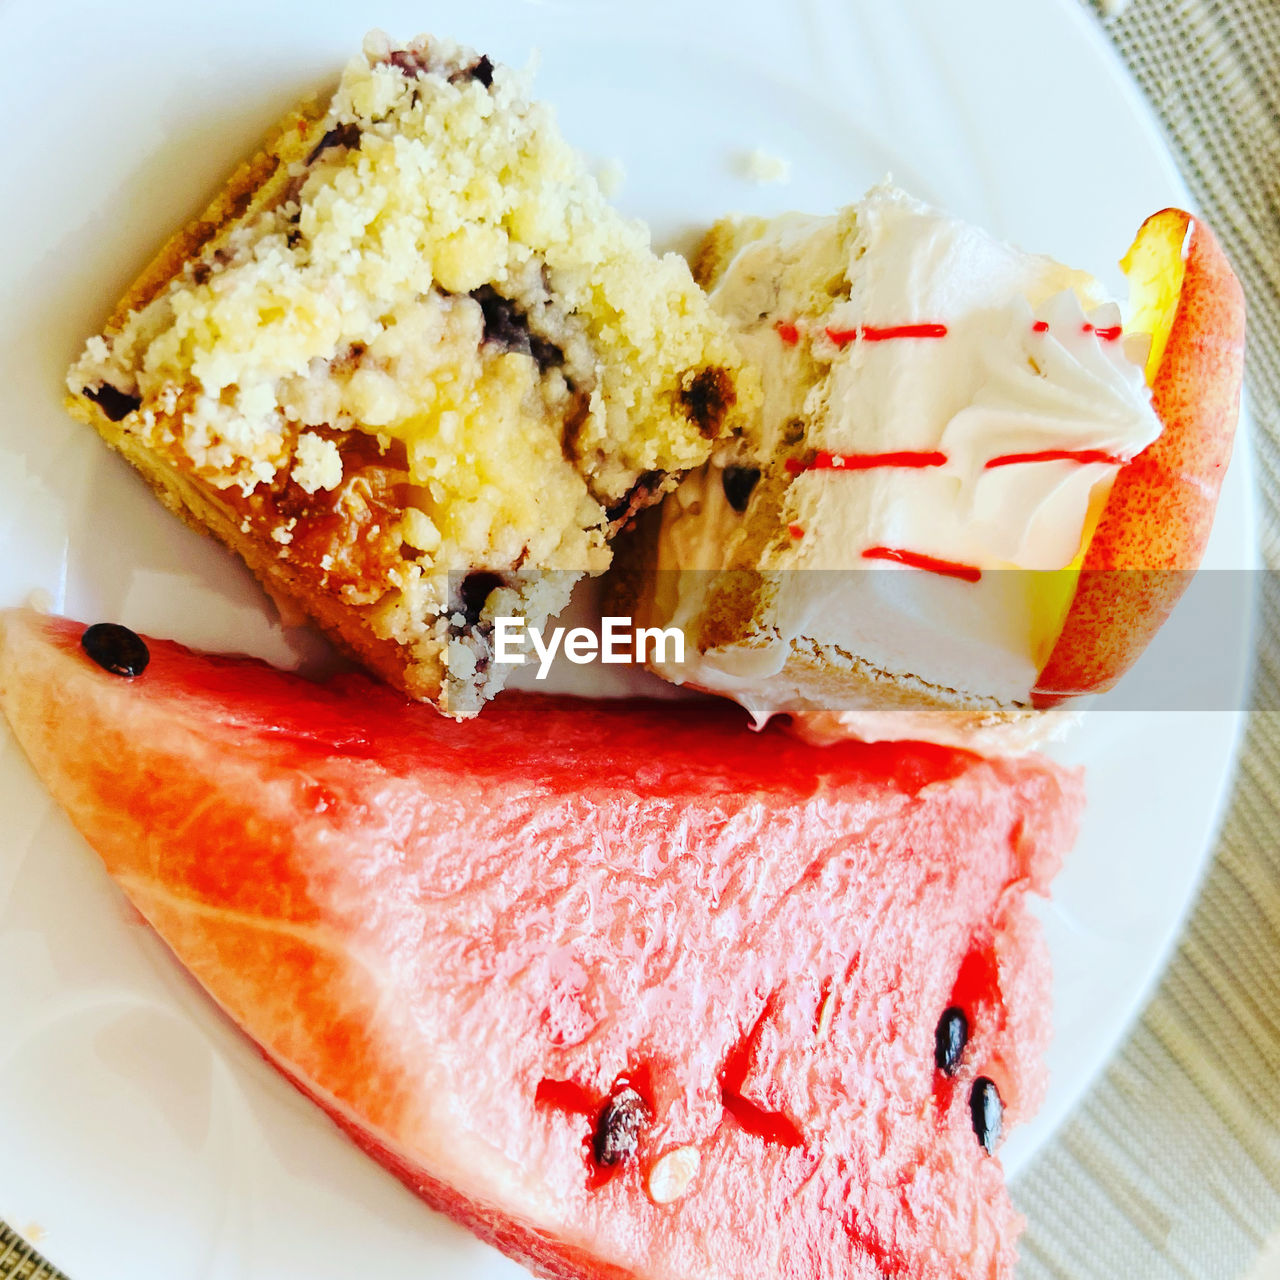 food and drink, food, plate, dish, produce, fast food, breakfast, freshness, dessert, meal, fruit, no people, indoors, healthy eating, cuisine, close-up, slice, sweet food, baked, sweet, high angle view